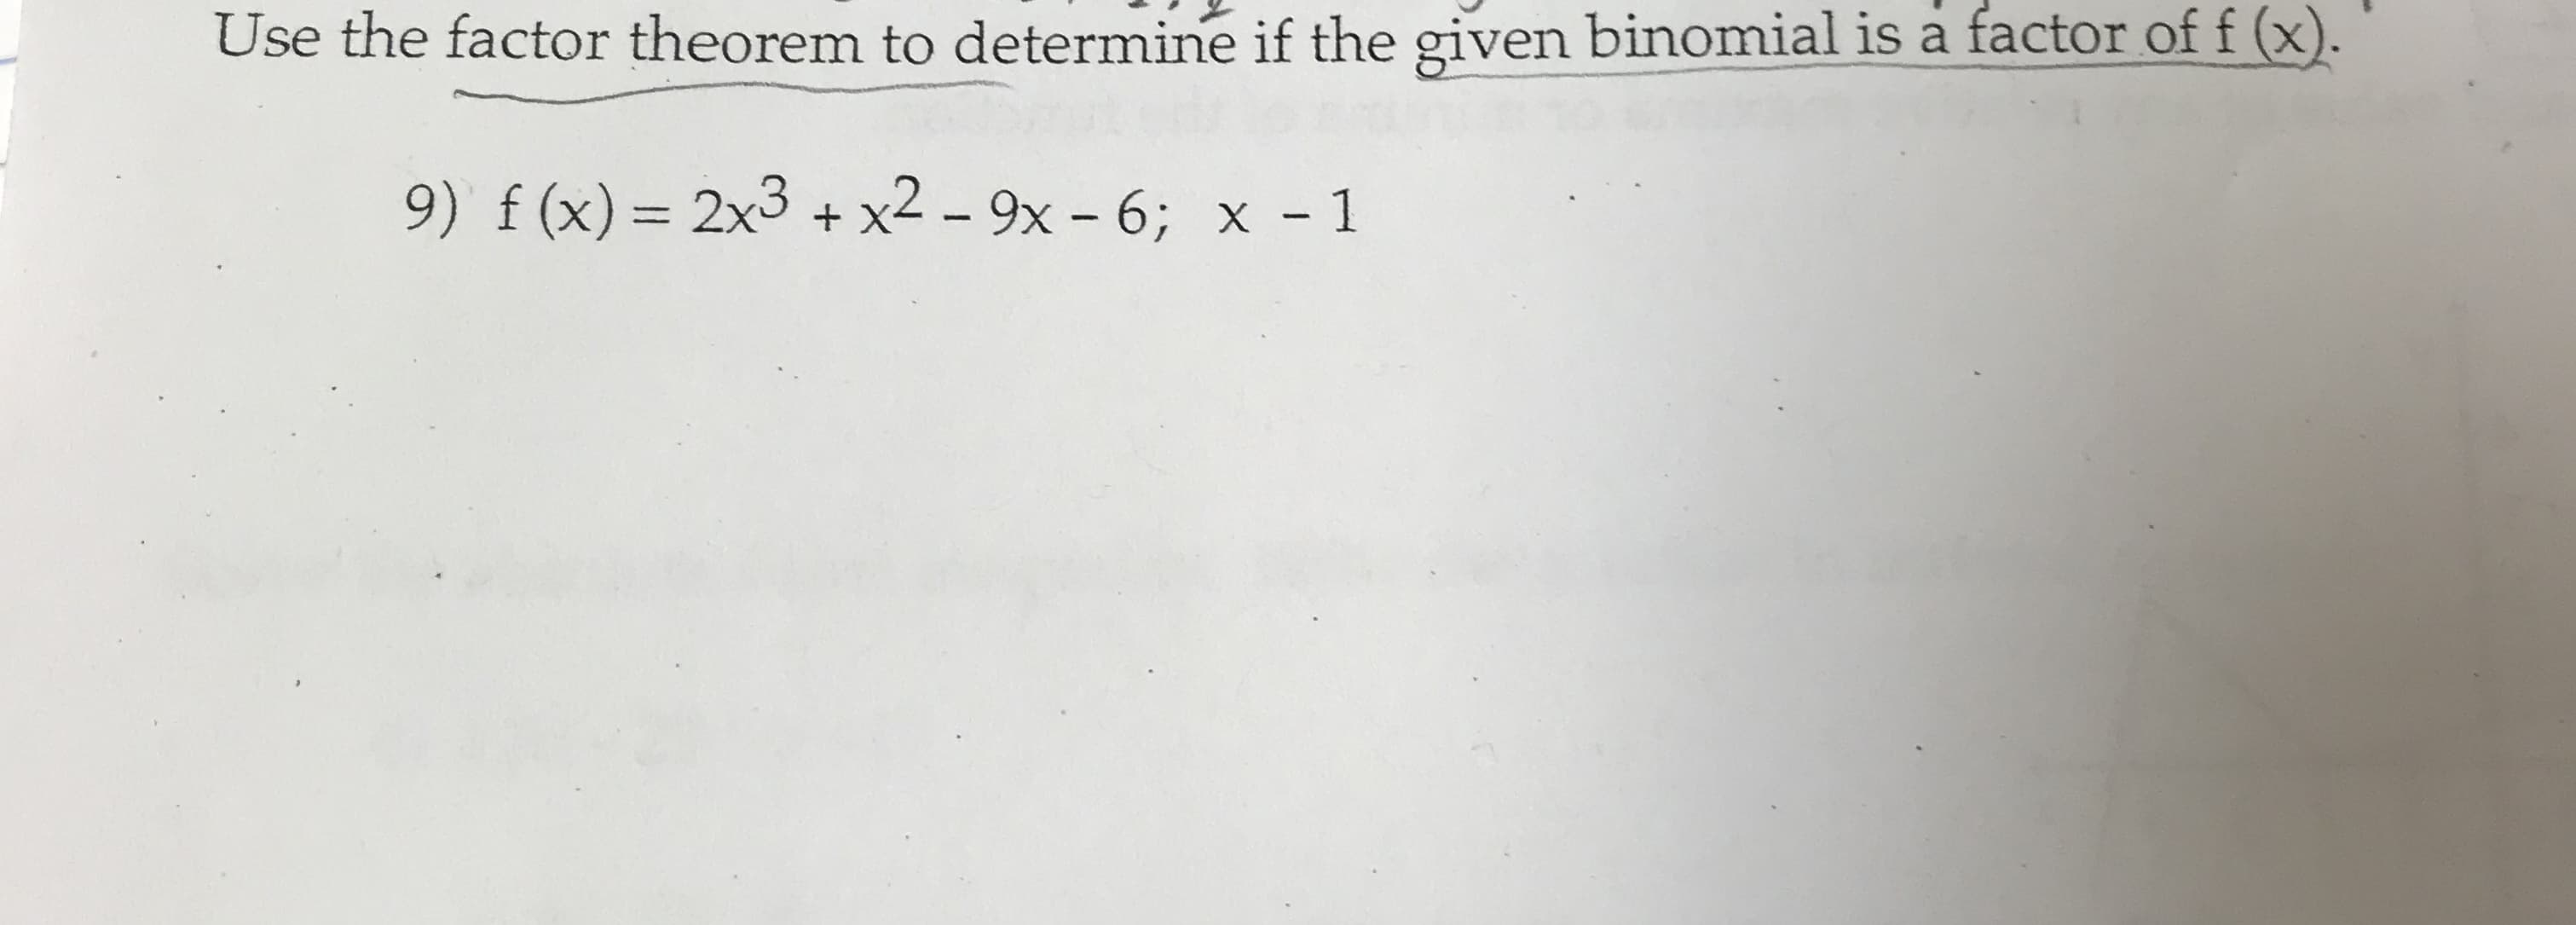 Use the factor theorem to determine if the given binomial is a factor of f (x).
9) f (x)= 2x3 + x2 – 9x - 6; x - 1
